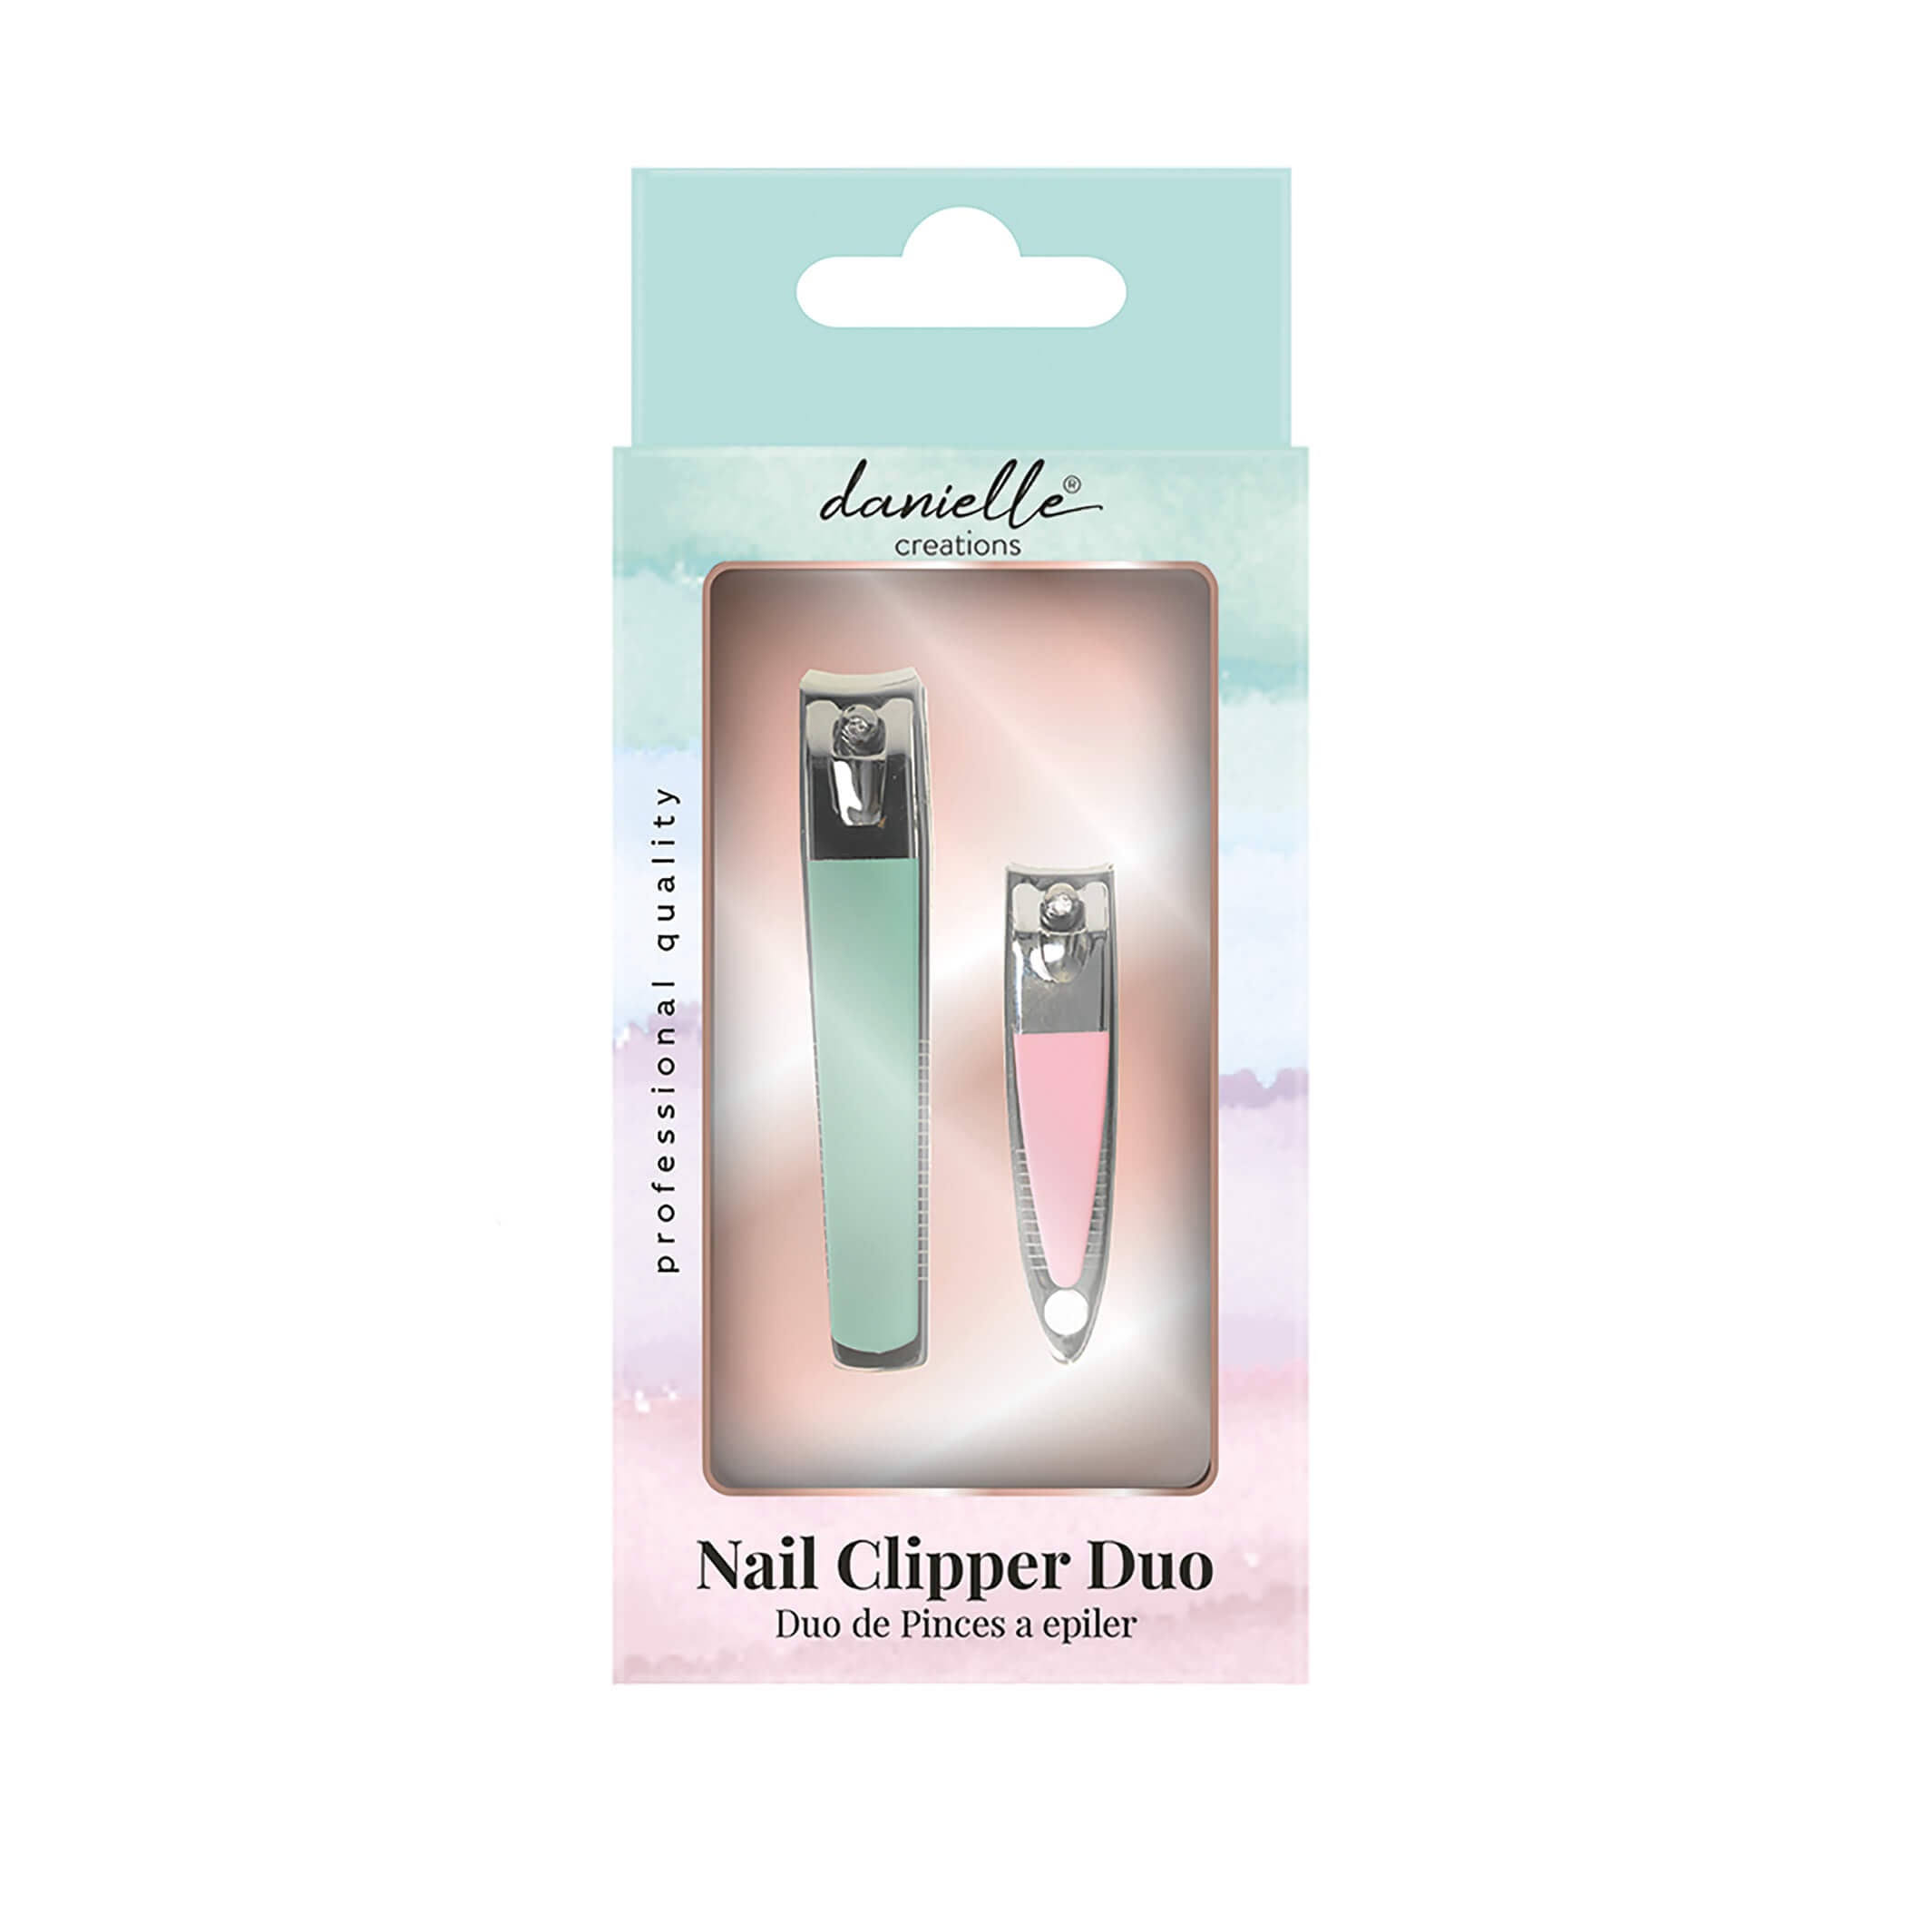 Danielle Pastal Nail Clippers Duo Set